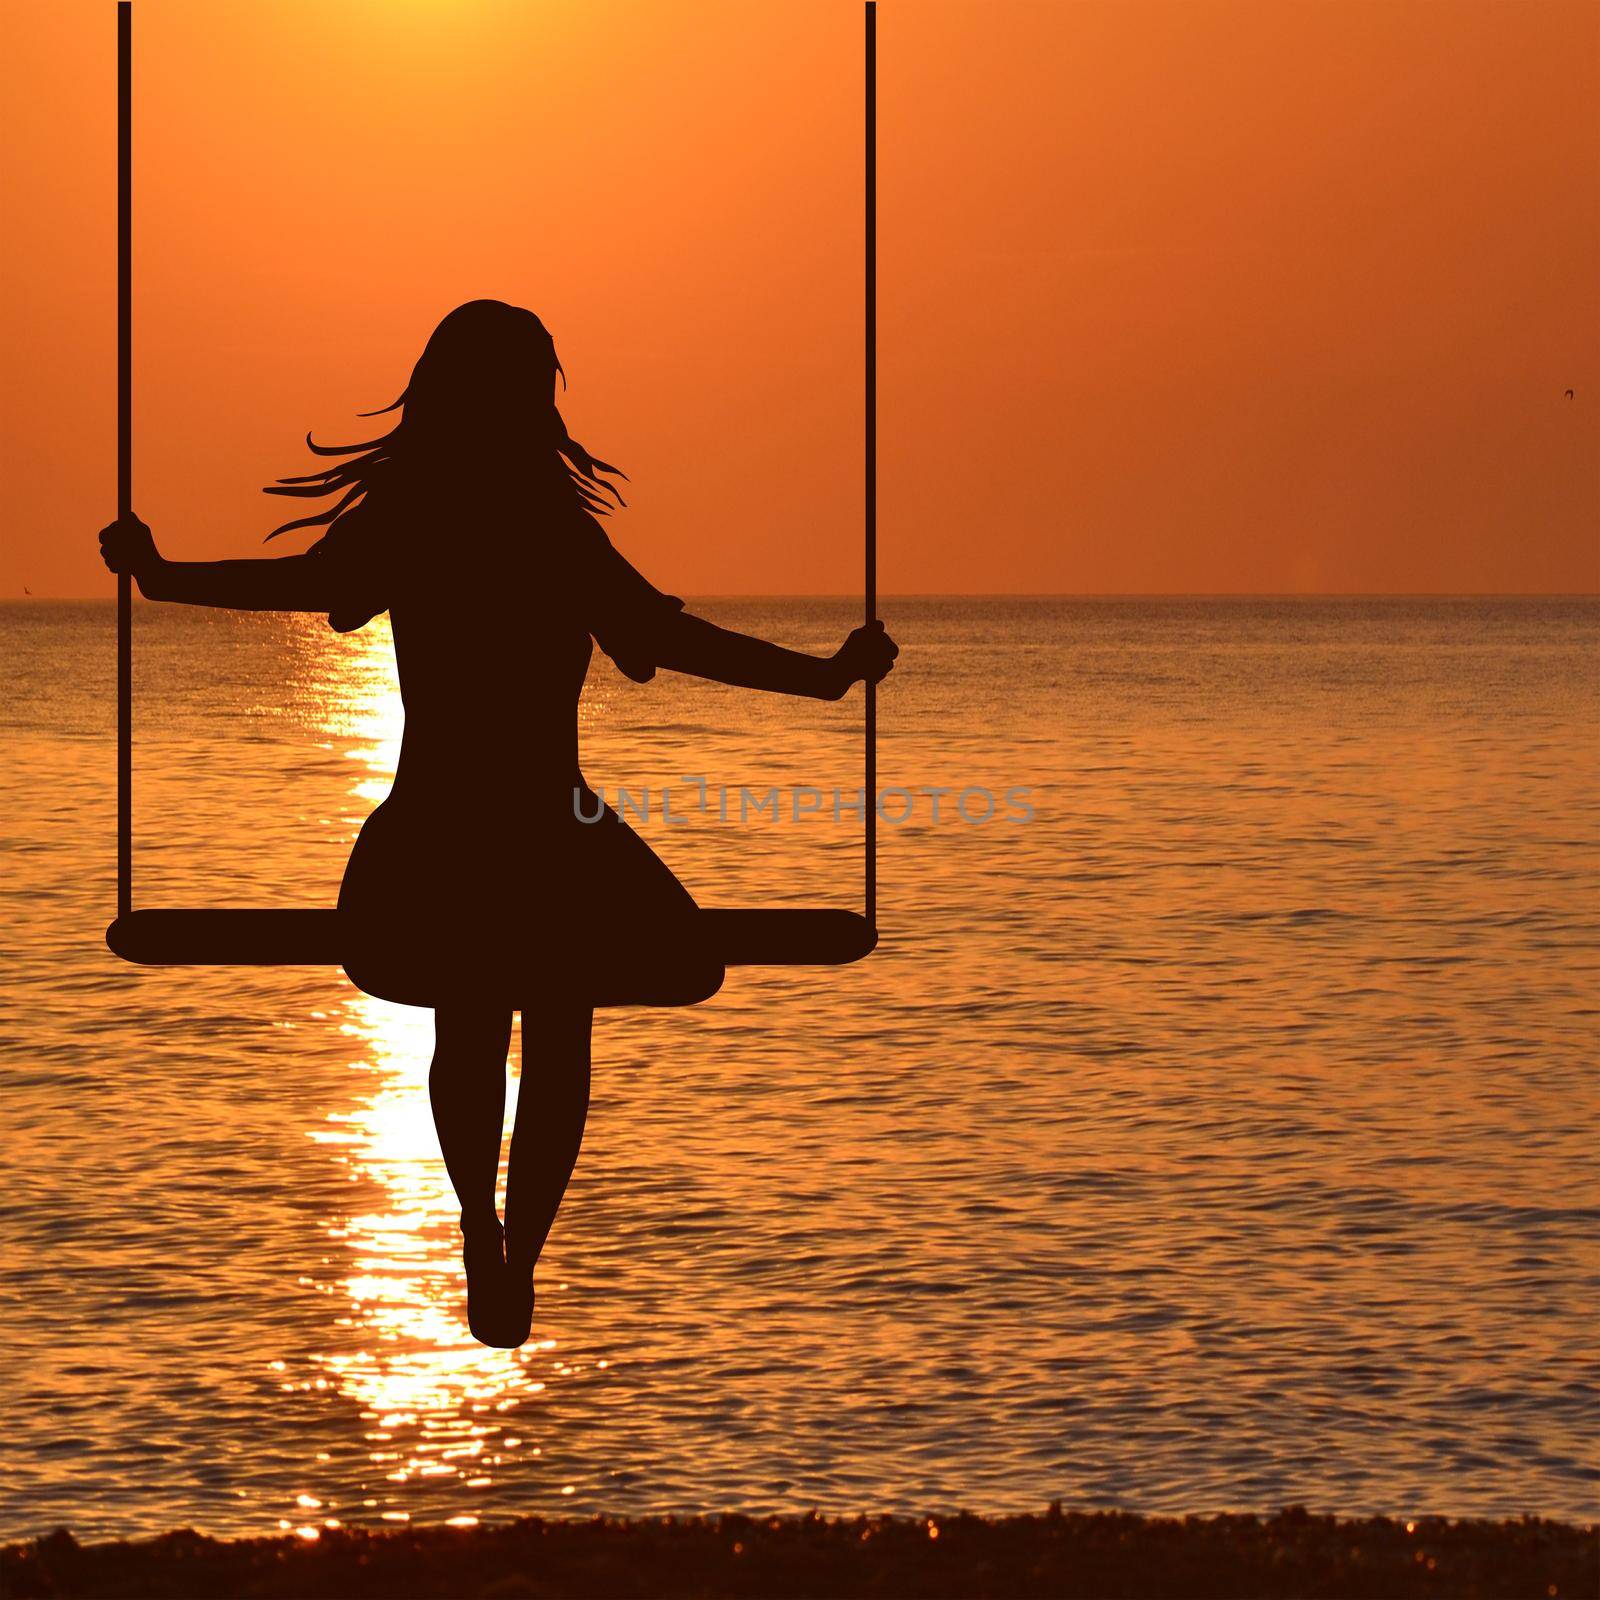 Silhouette of child girl on swing in sunset at seaside by hibrida13